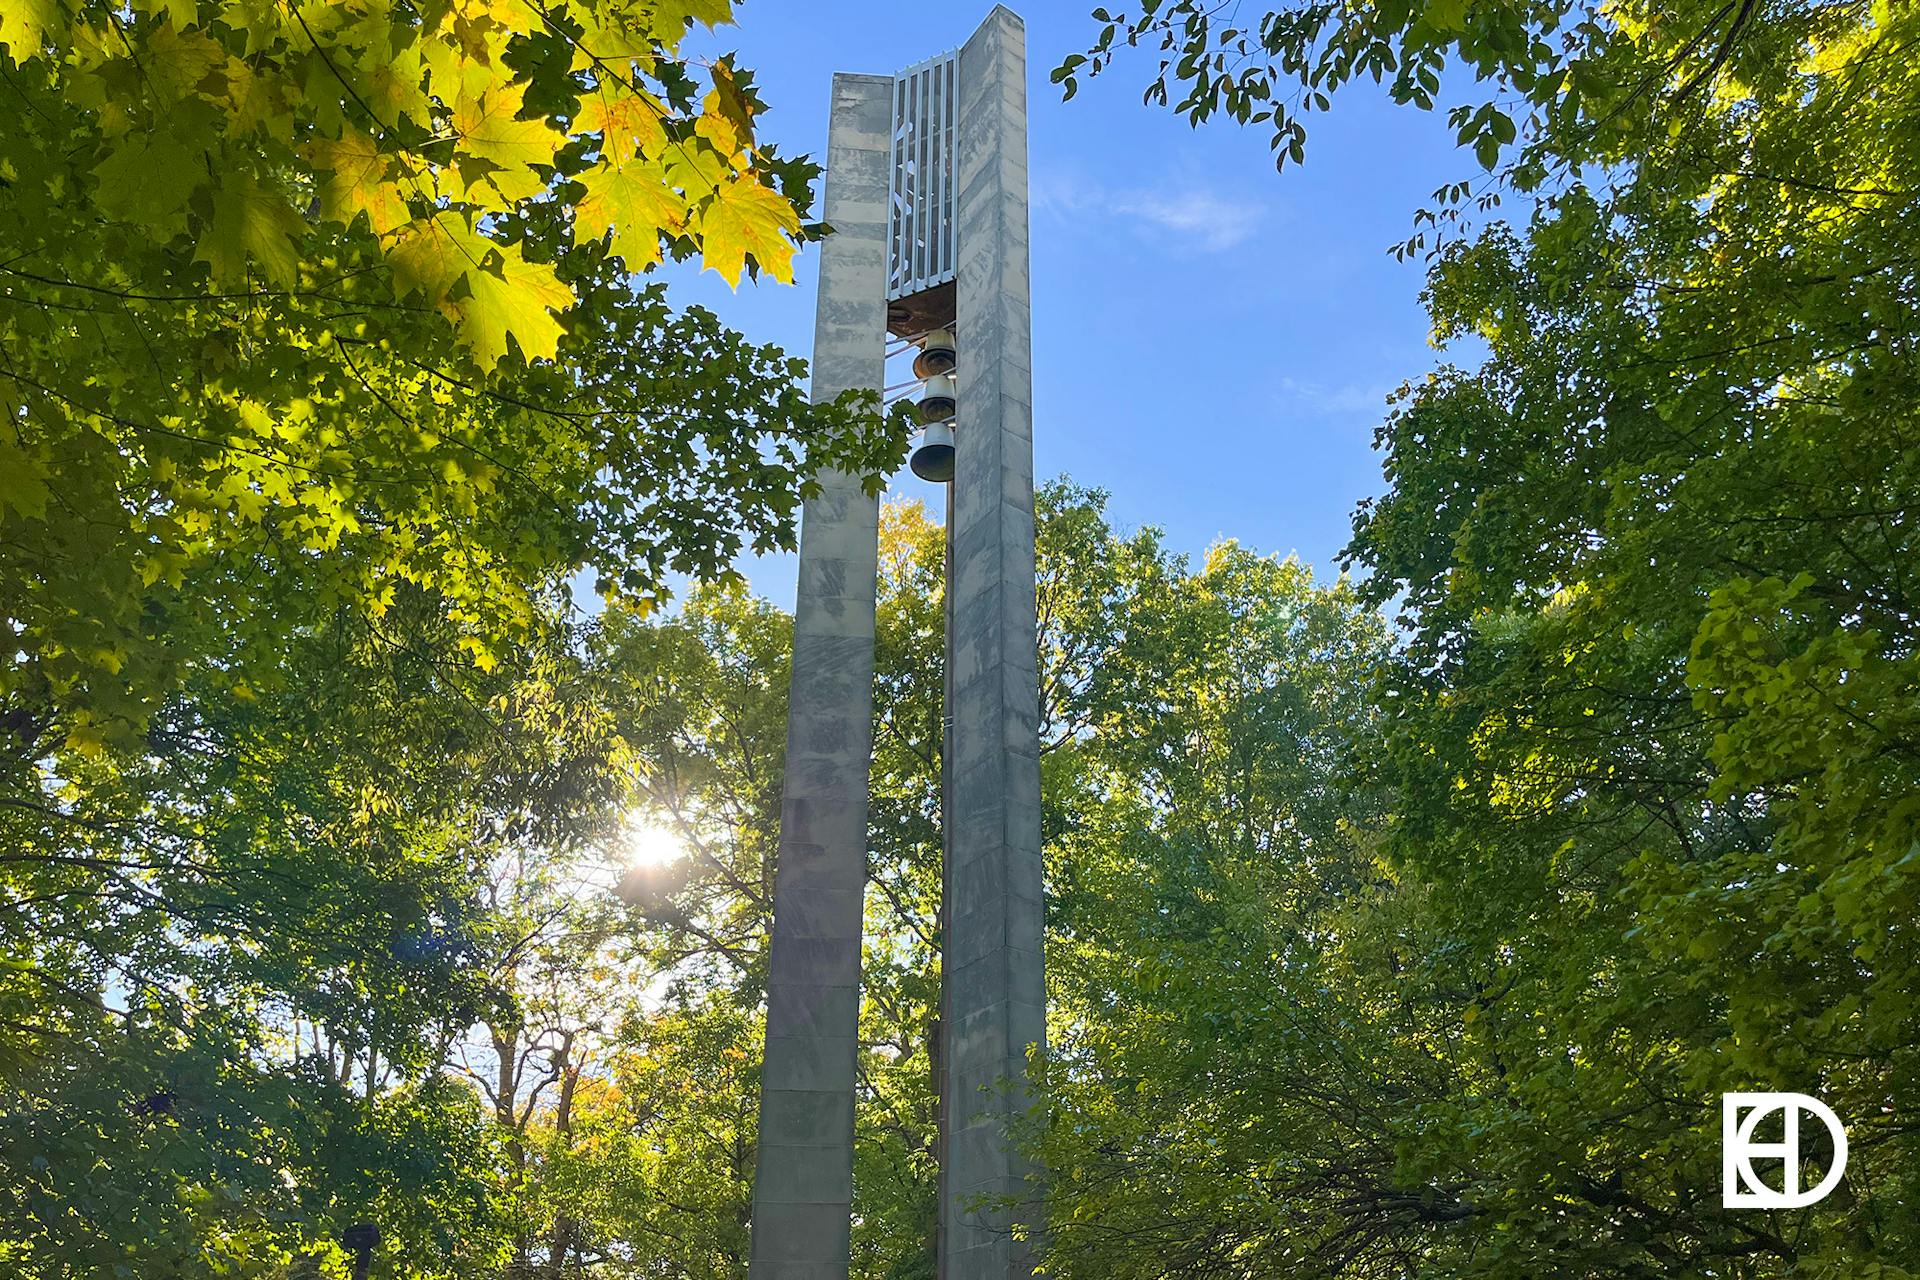 Photo of bell tower at Holcomb Gardens